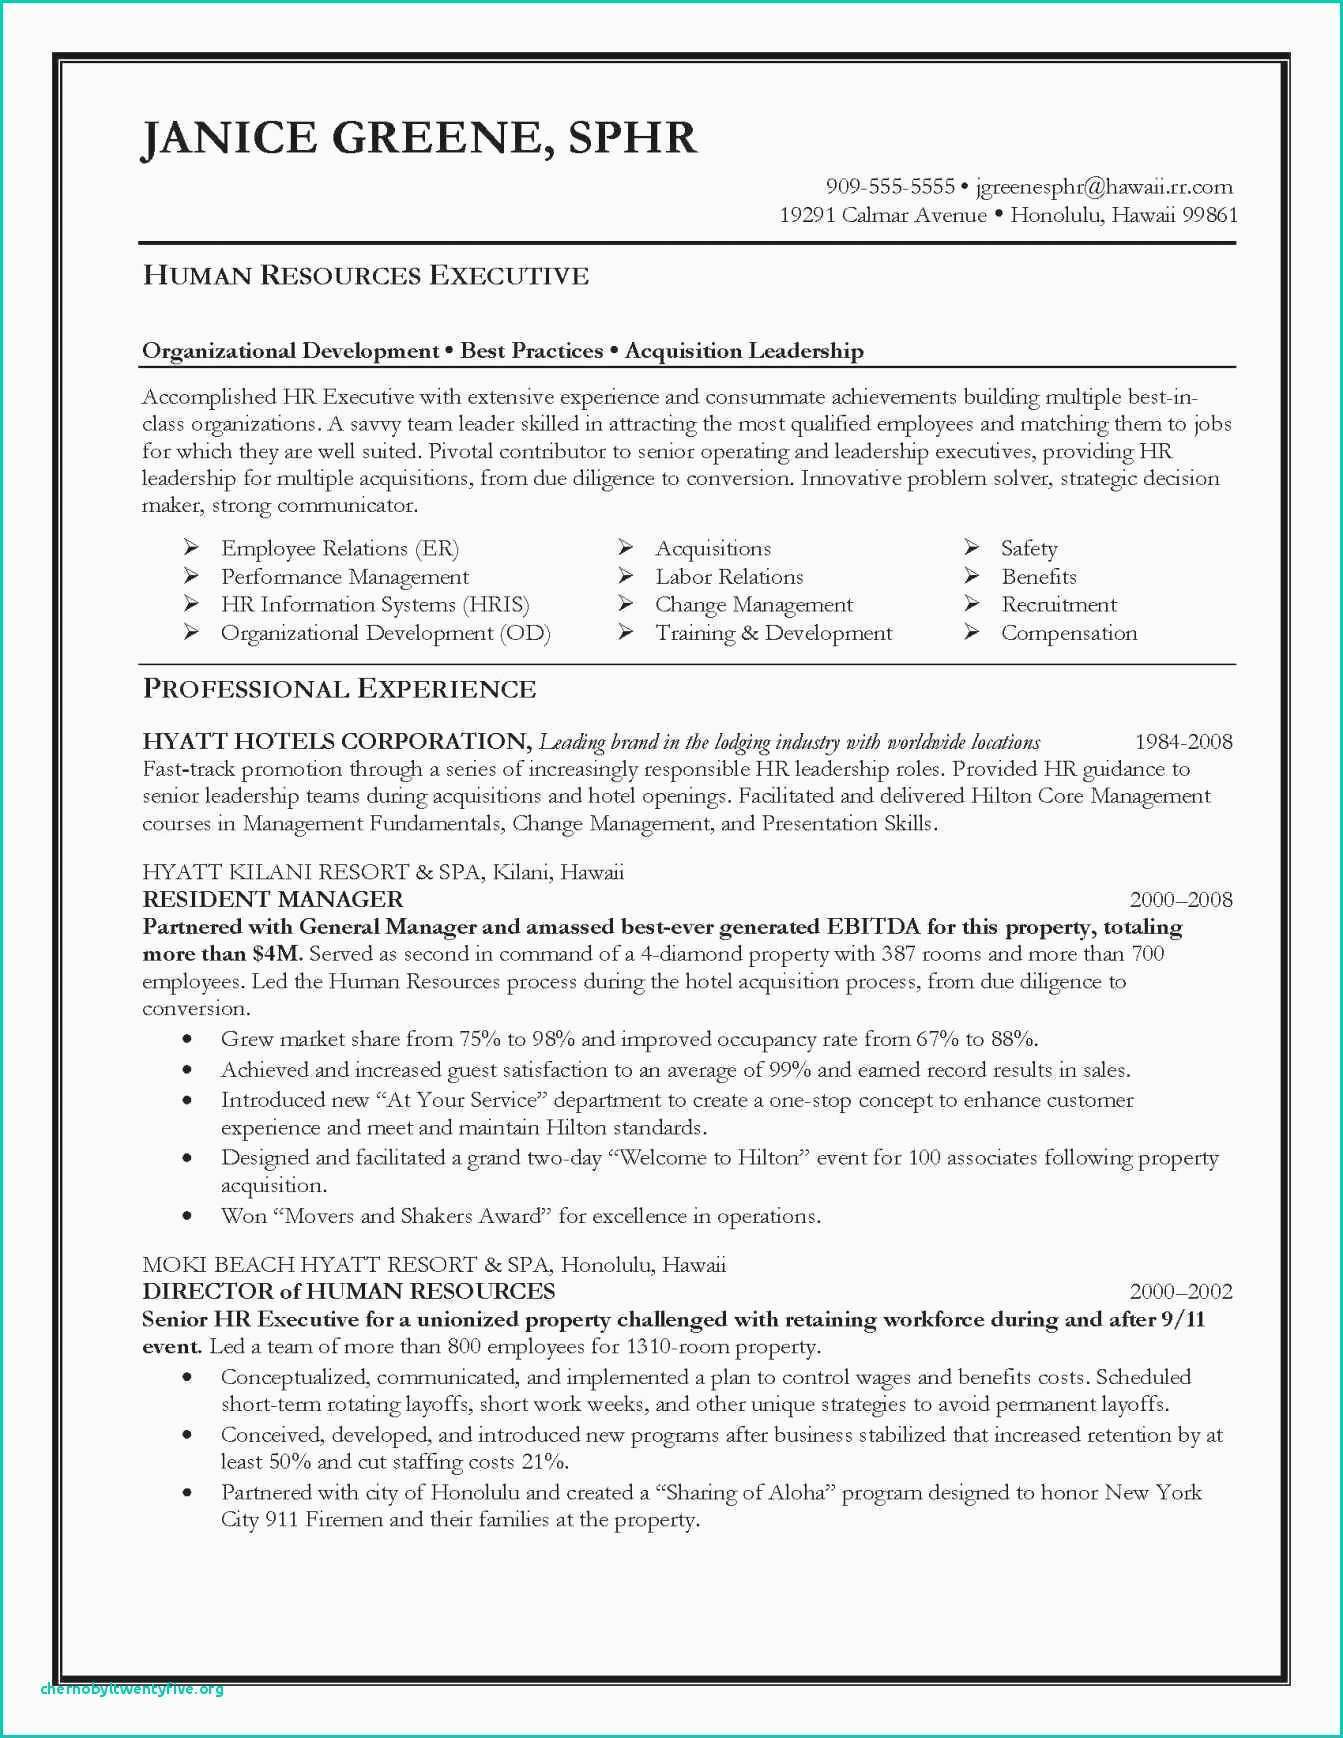 How Long Should A Resume Be What Should Go On A Resume How Long Should My Resume Be Luxury Awesome Resume For Highschool Of What Should Go On A Resume how long should a resume be|wikiresume.com